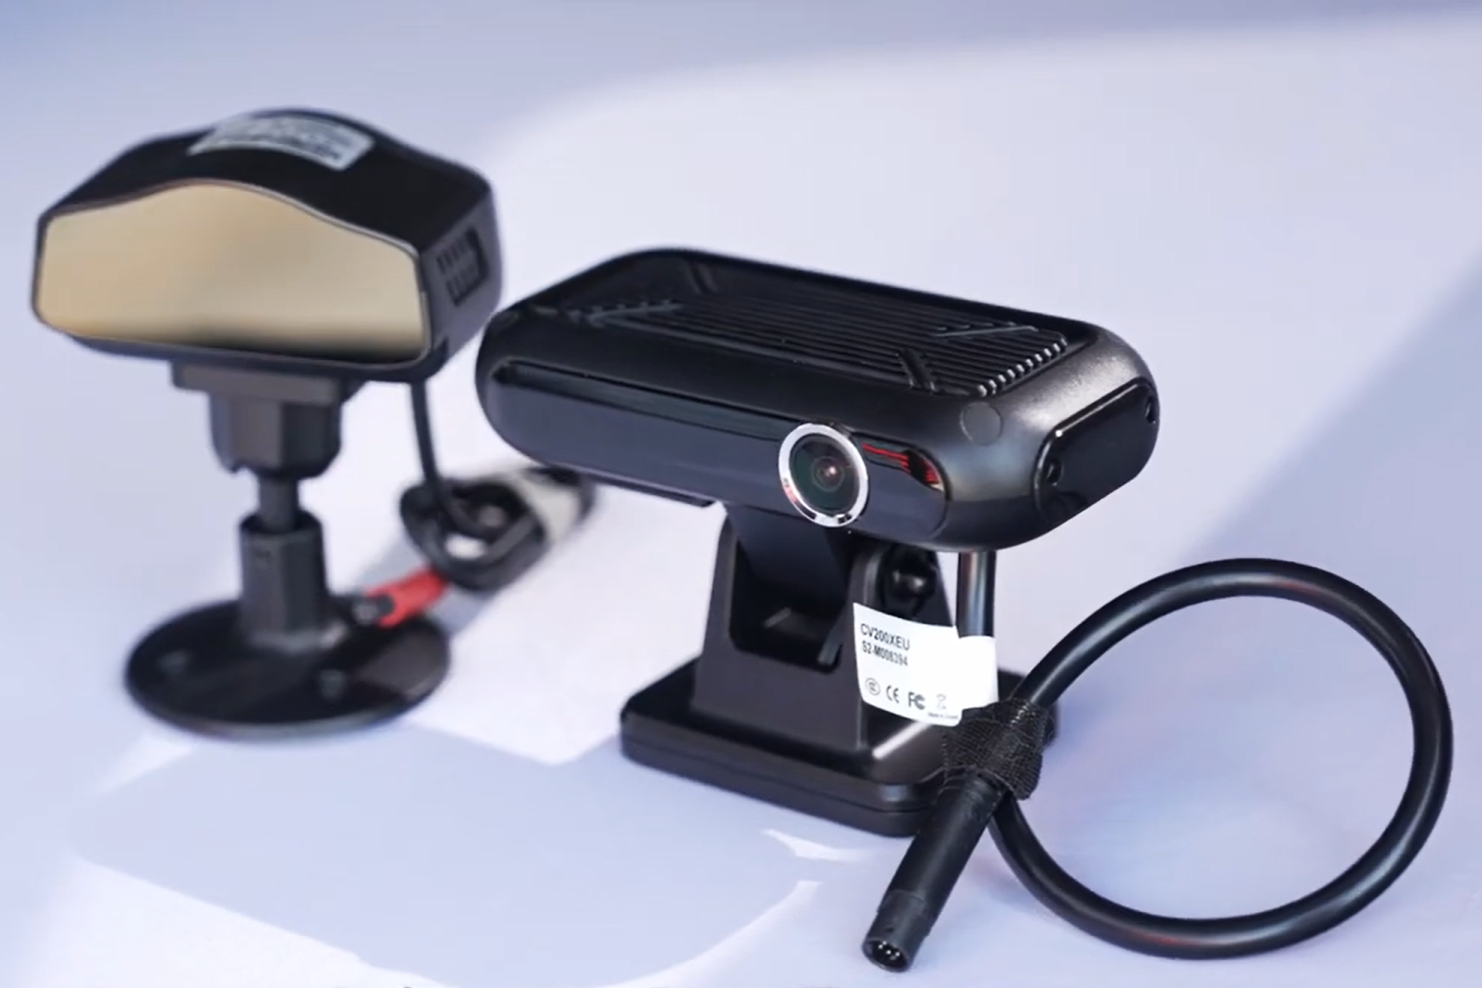 FAST Logistics' massive fleet uses AI Dashcam to boost road safety and operational efficiency